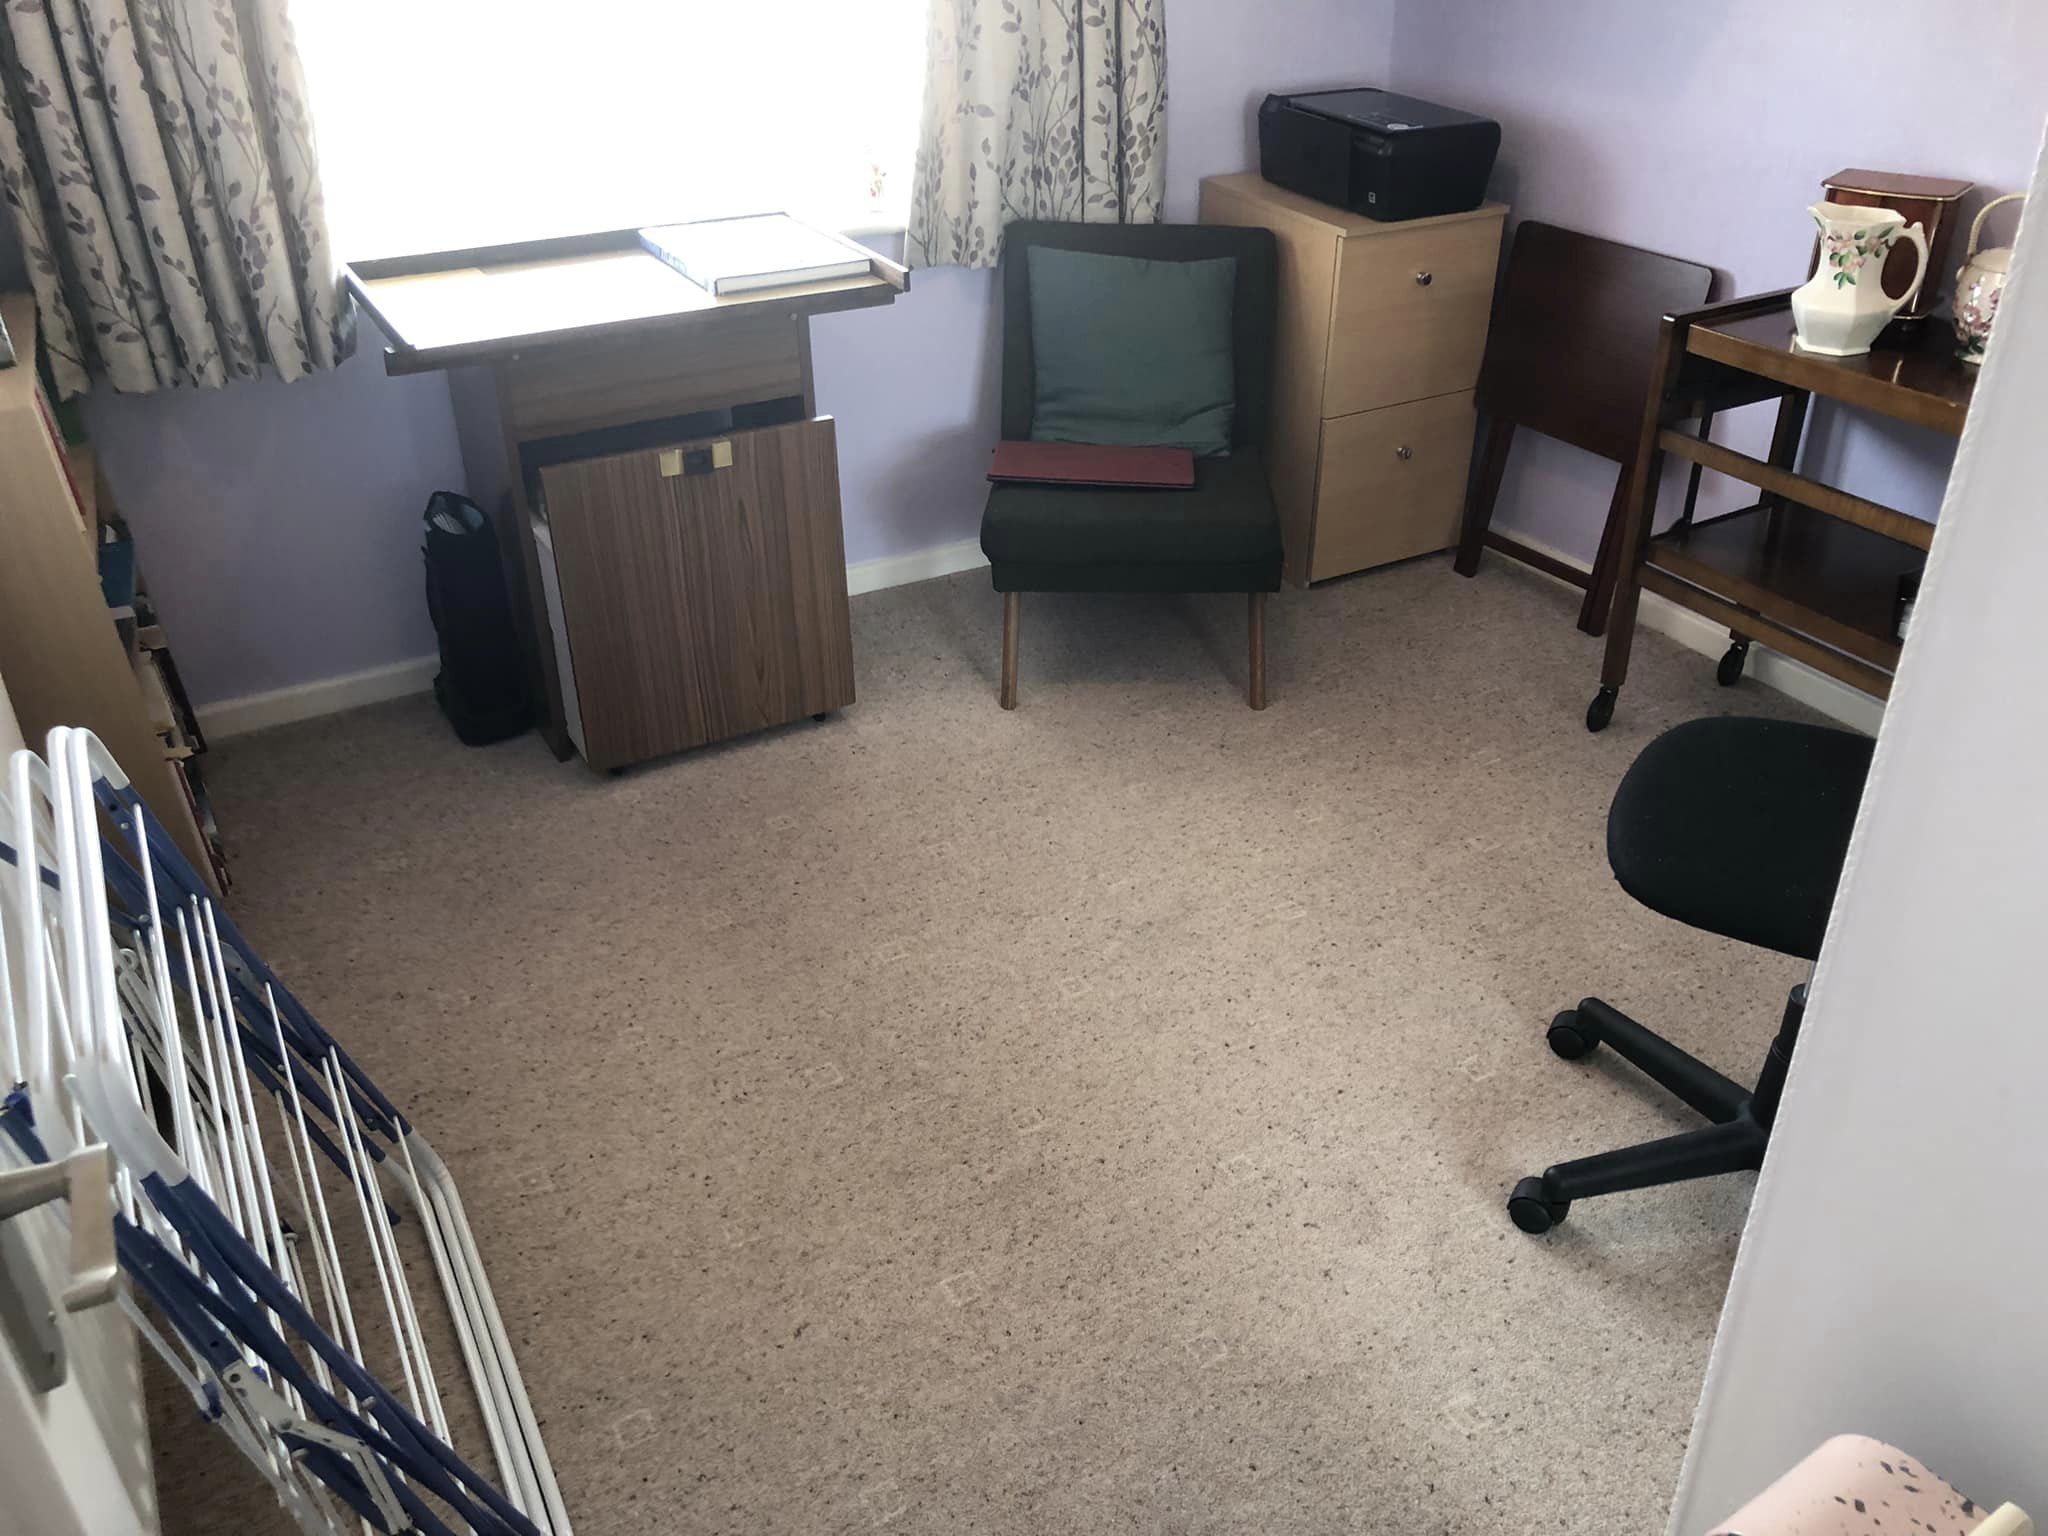 House clearance before & after photos